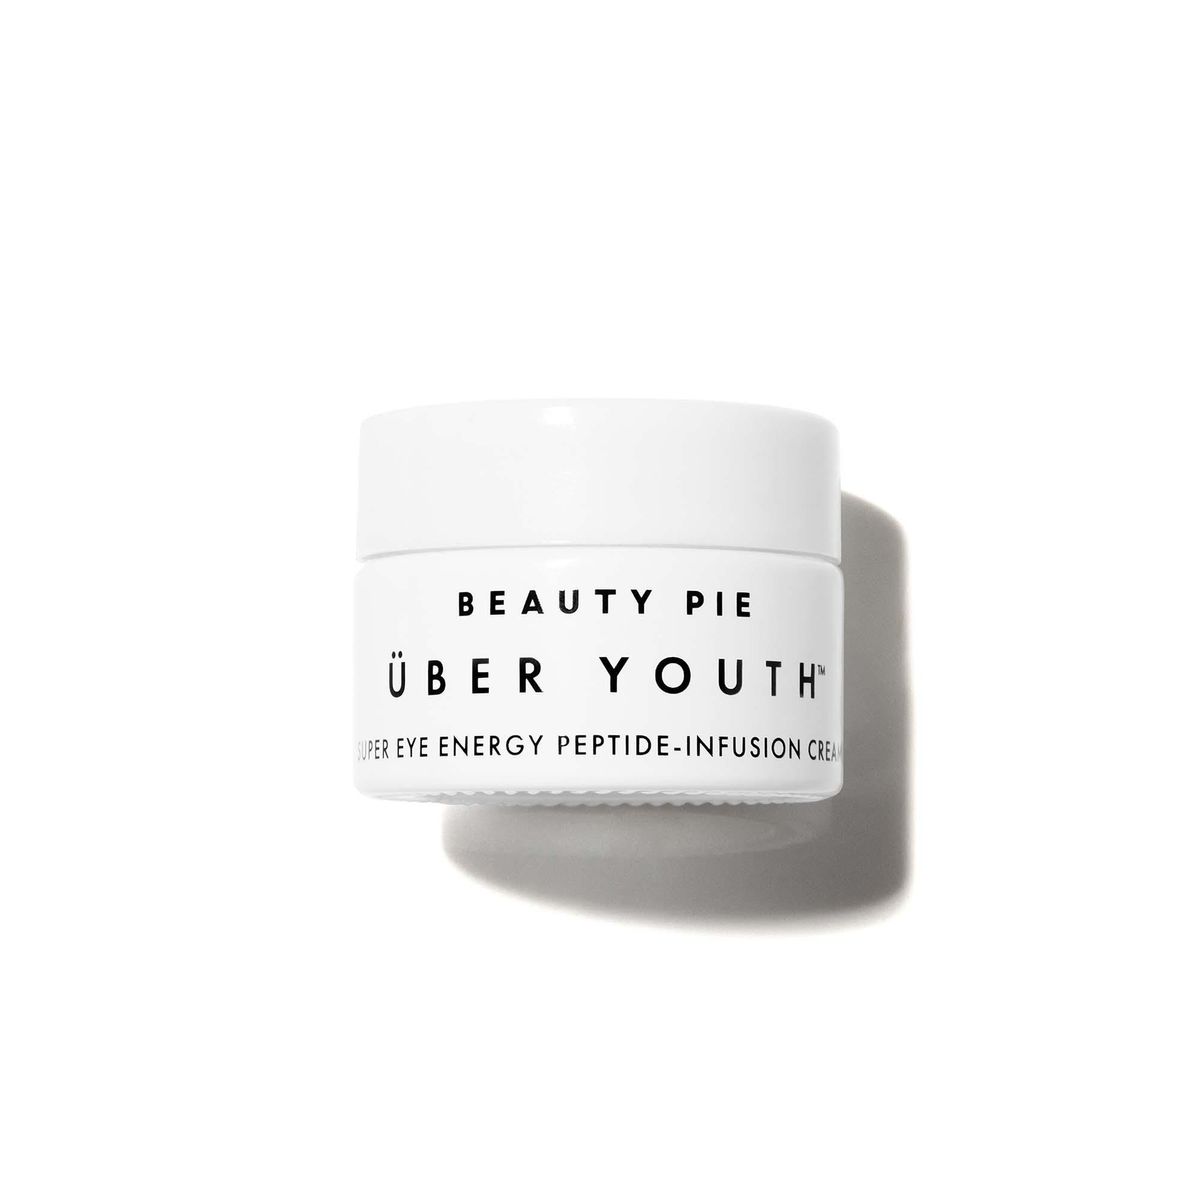 beauty pie uber youth super eye energy peptide infusion cream